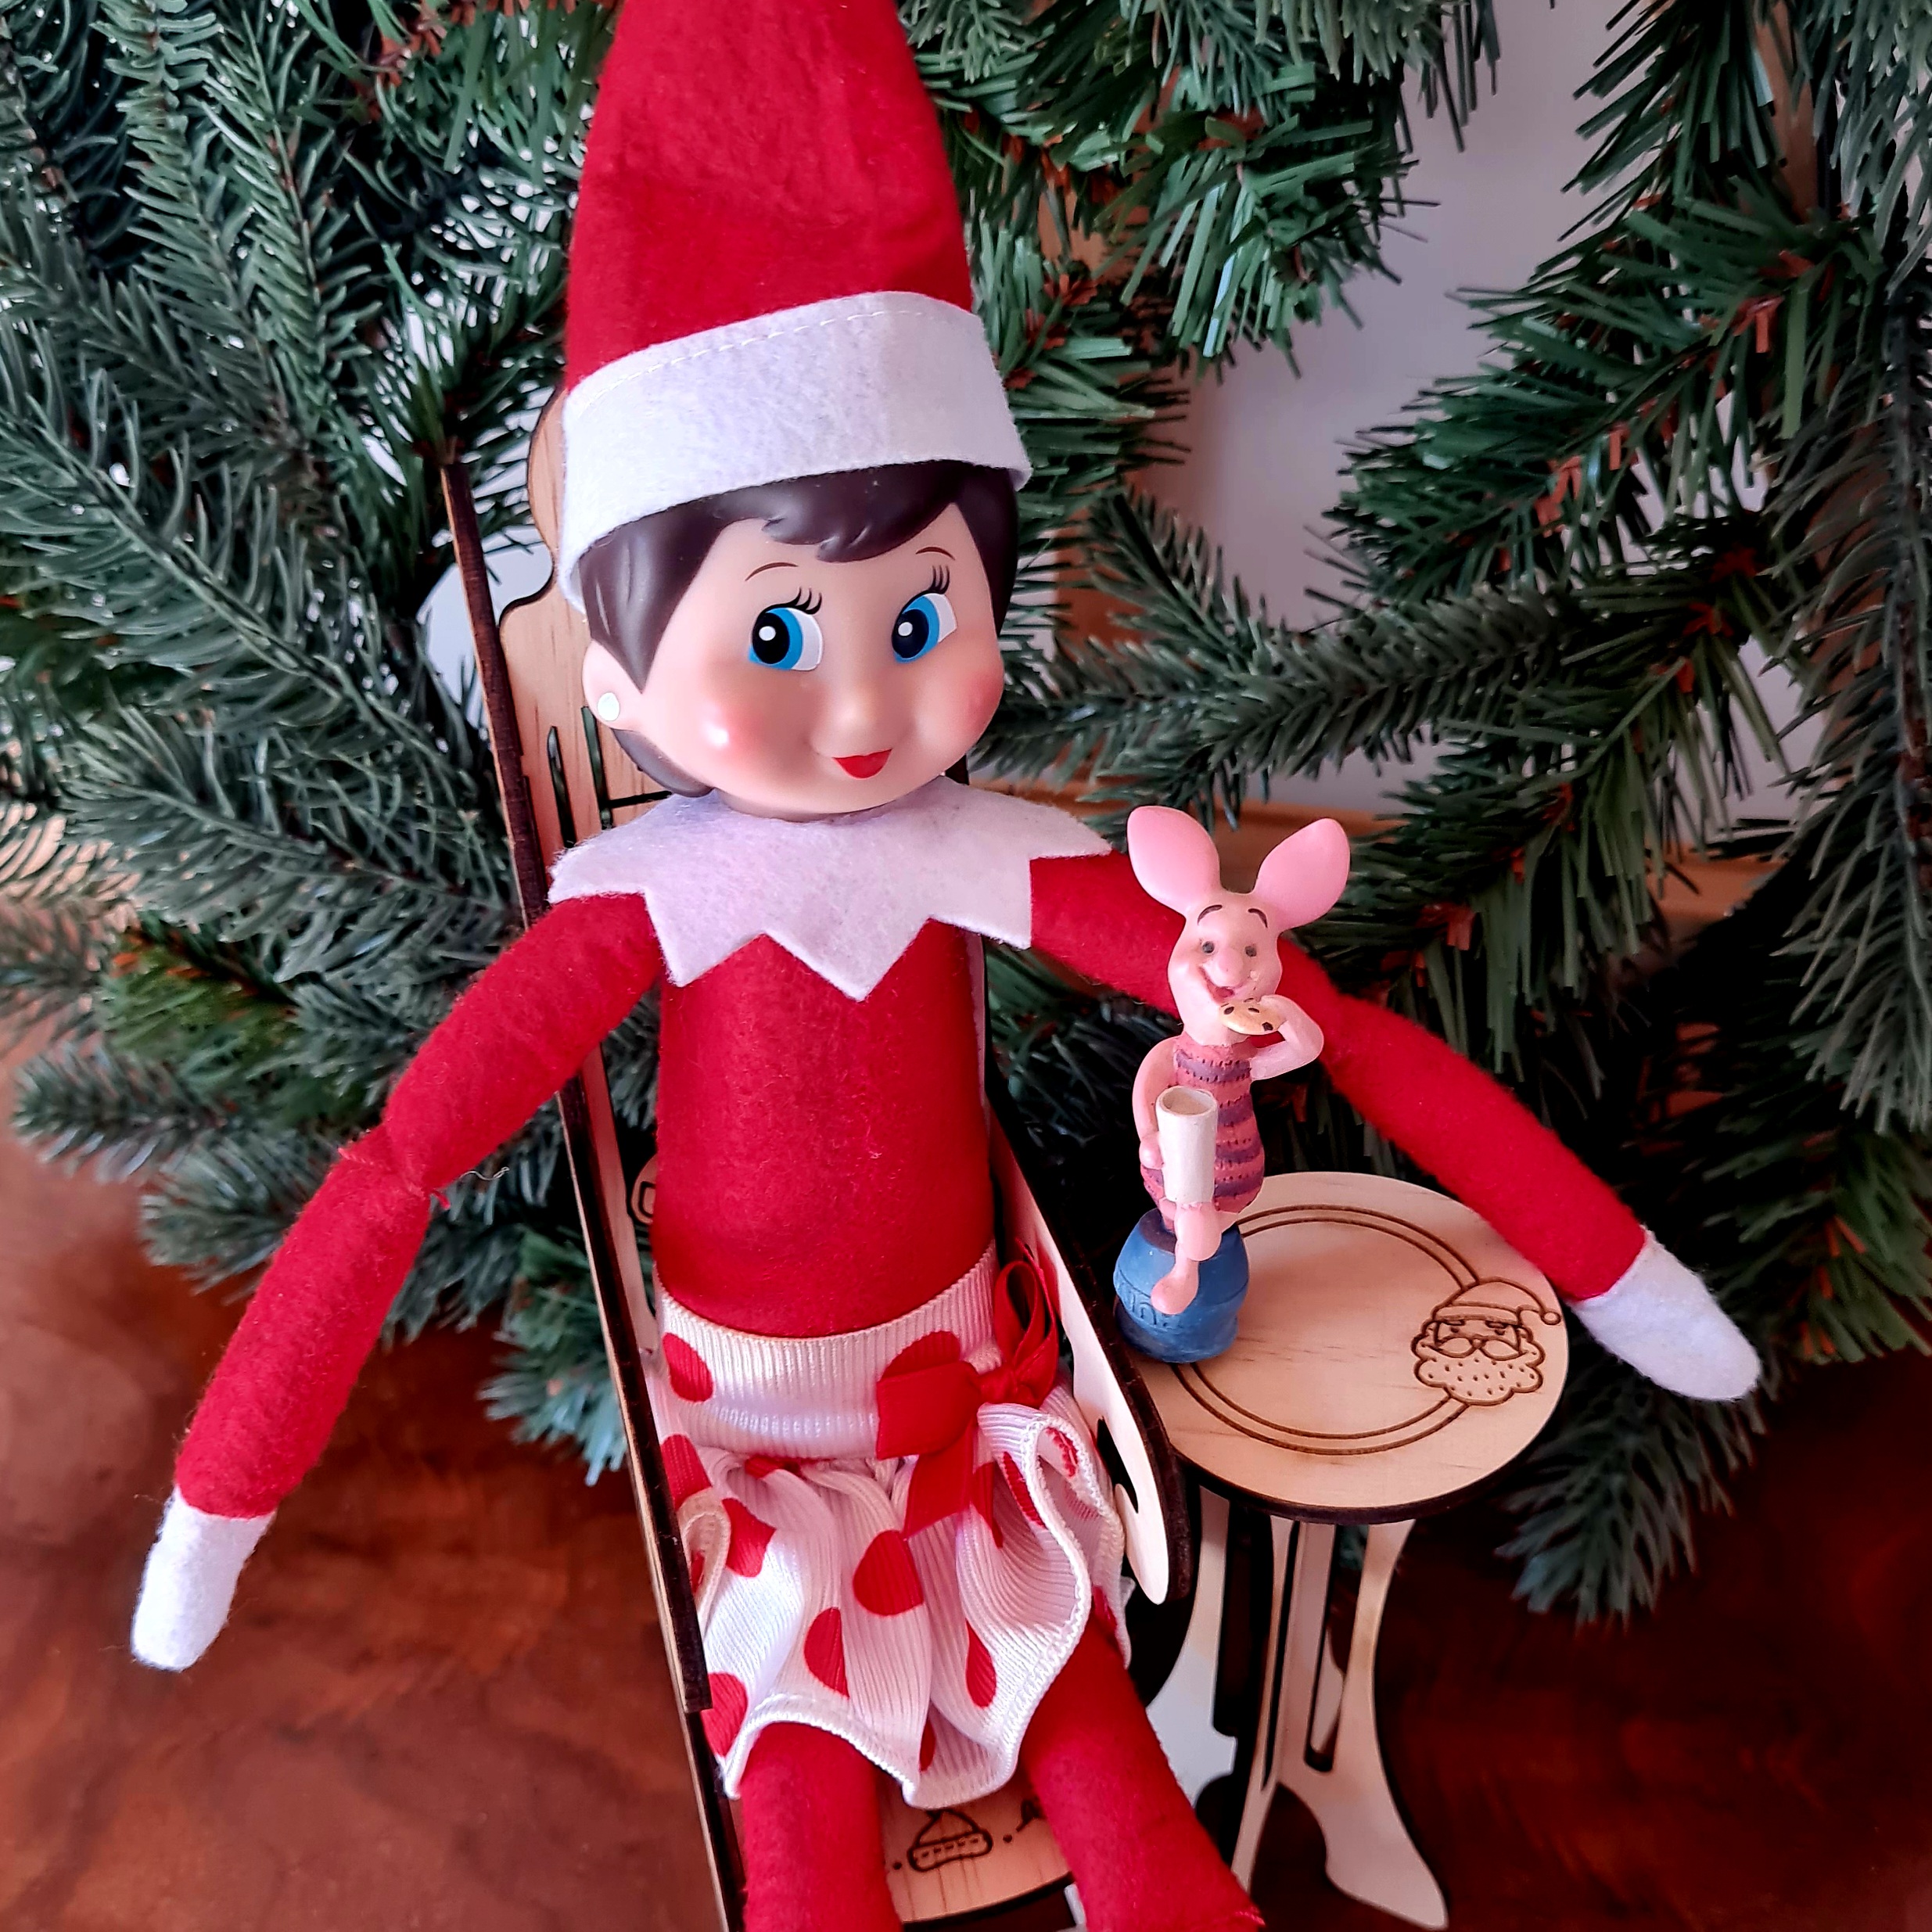 Elf in rocking chair with table